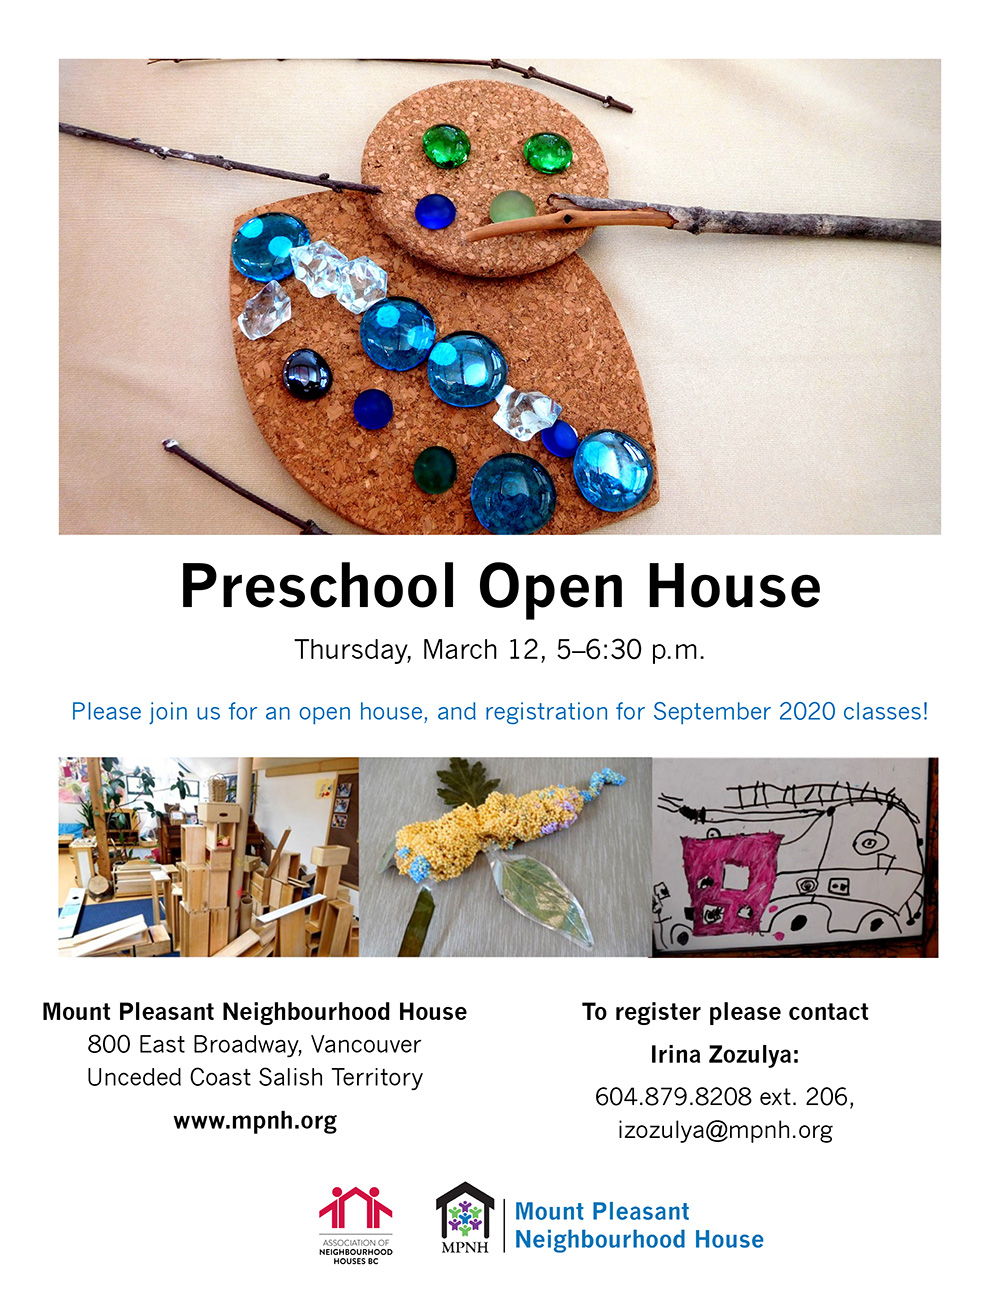 Poster for preschool open house event showing art created by children